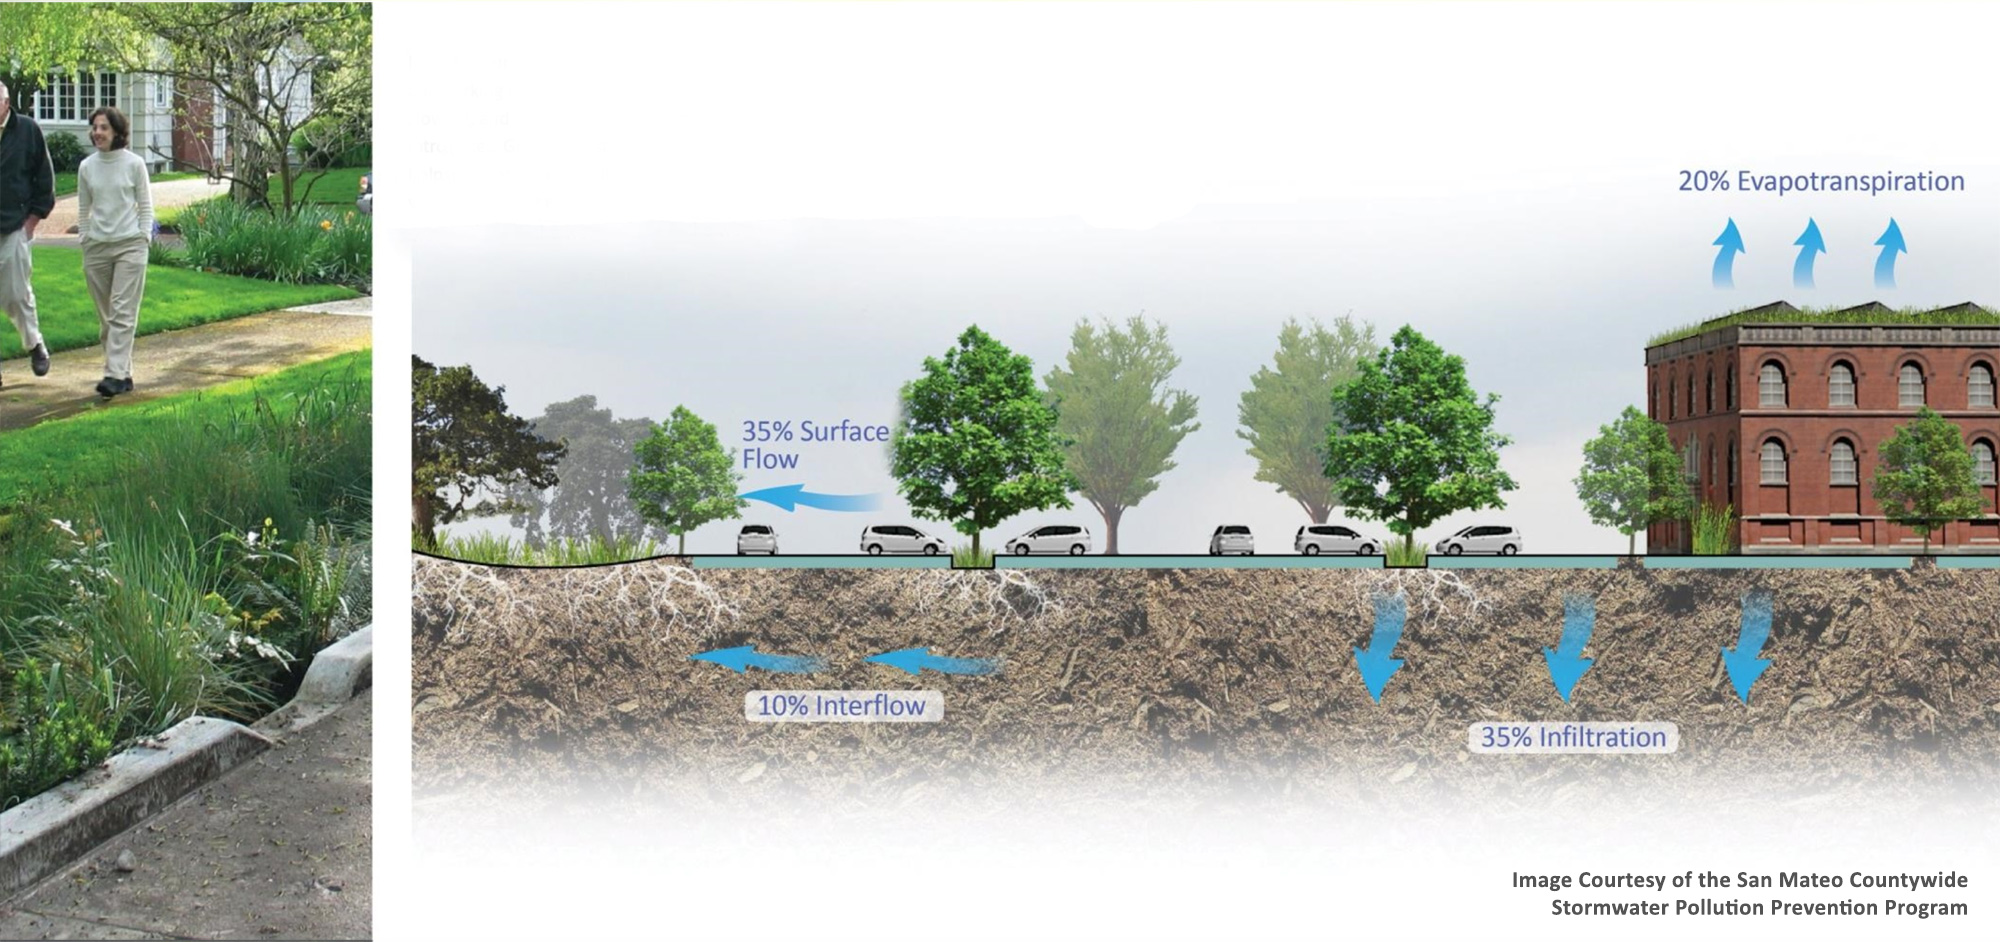 Balanced Development with GSI help collect, slow, and clean stormwater runoff and rebalance the natural water cycle by allowing water to evaporate and absorb into the ground